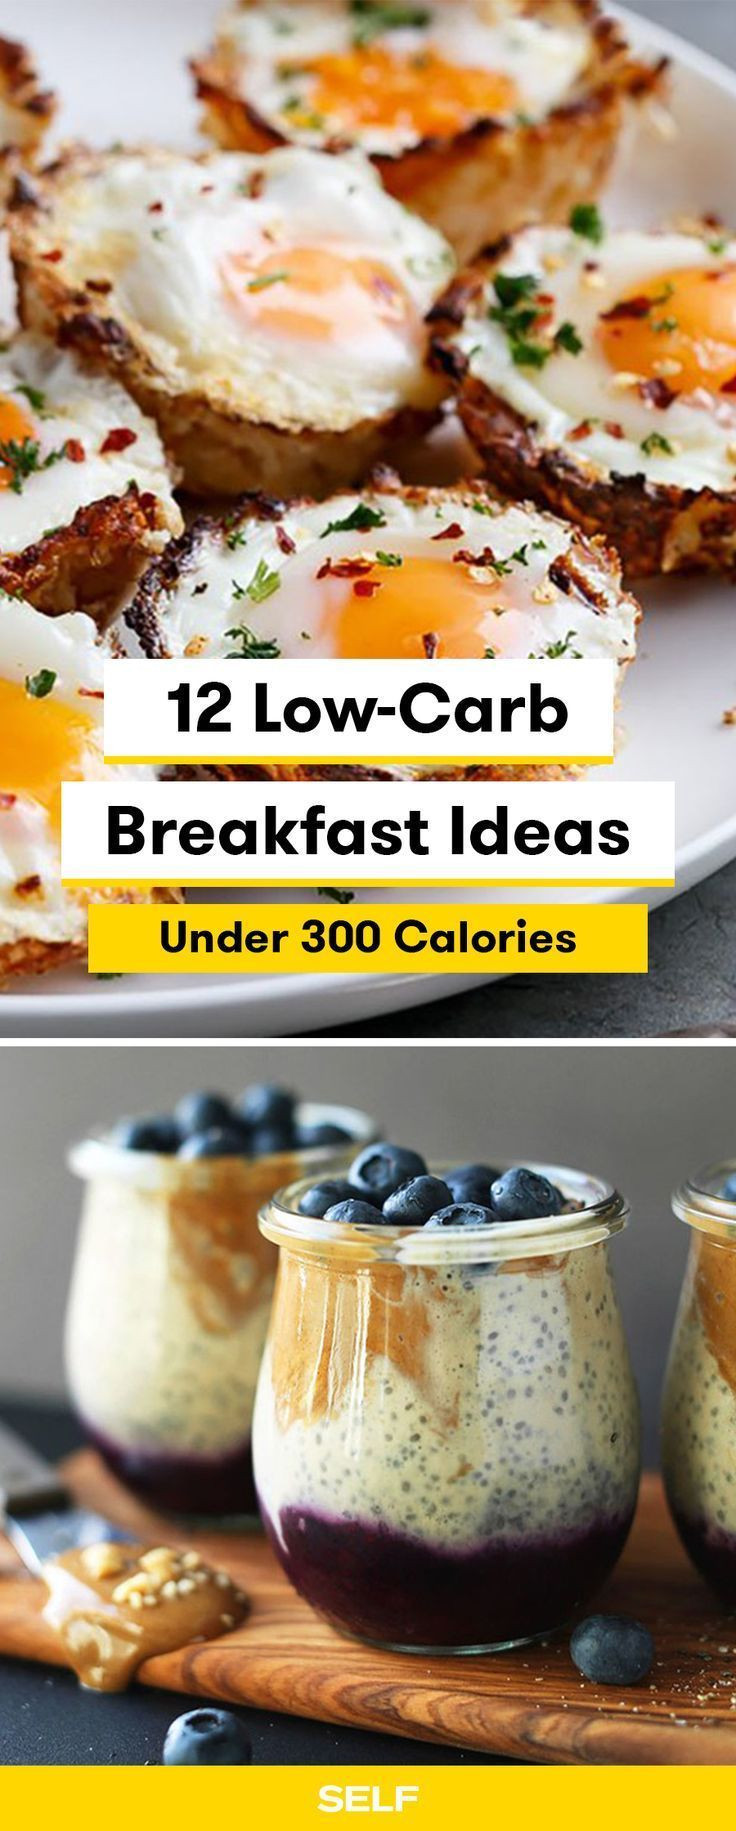 Low Carb Low Calorie Recipes Food Network
 12 Low Carb Breakfast Ideas Under 300 Calories in 2020